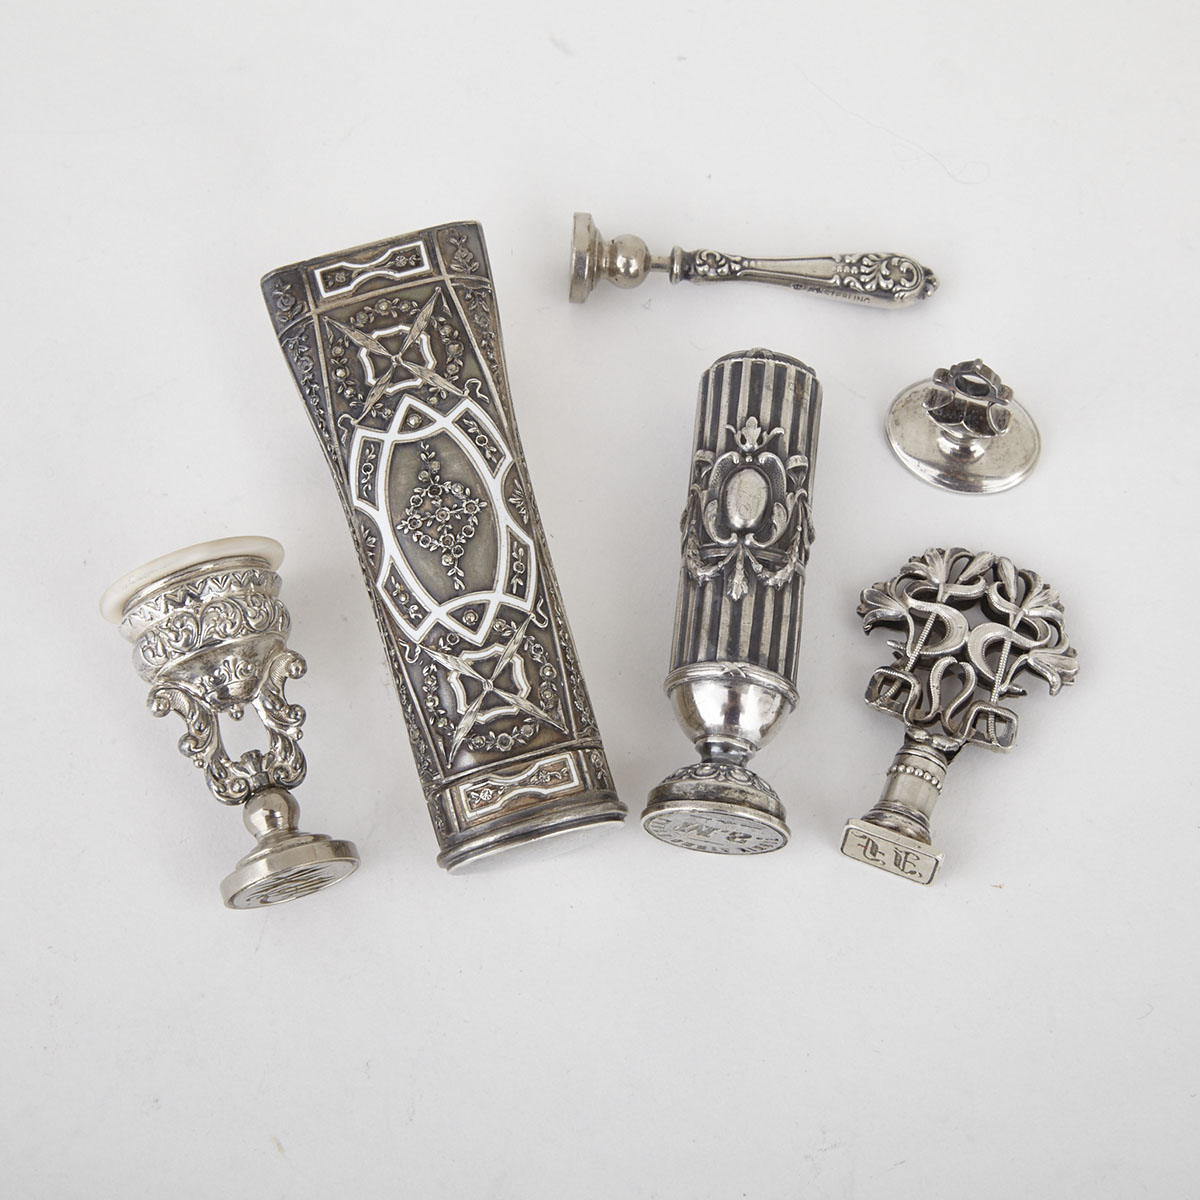 Group of Five Silver and Silvered Metal Desk Seals and a Stamp Roller, c.1900